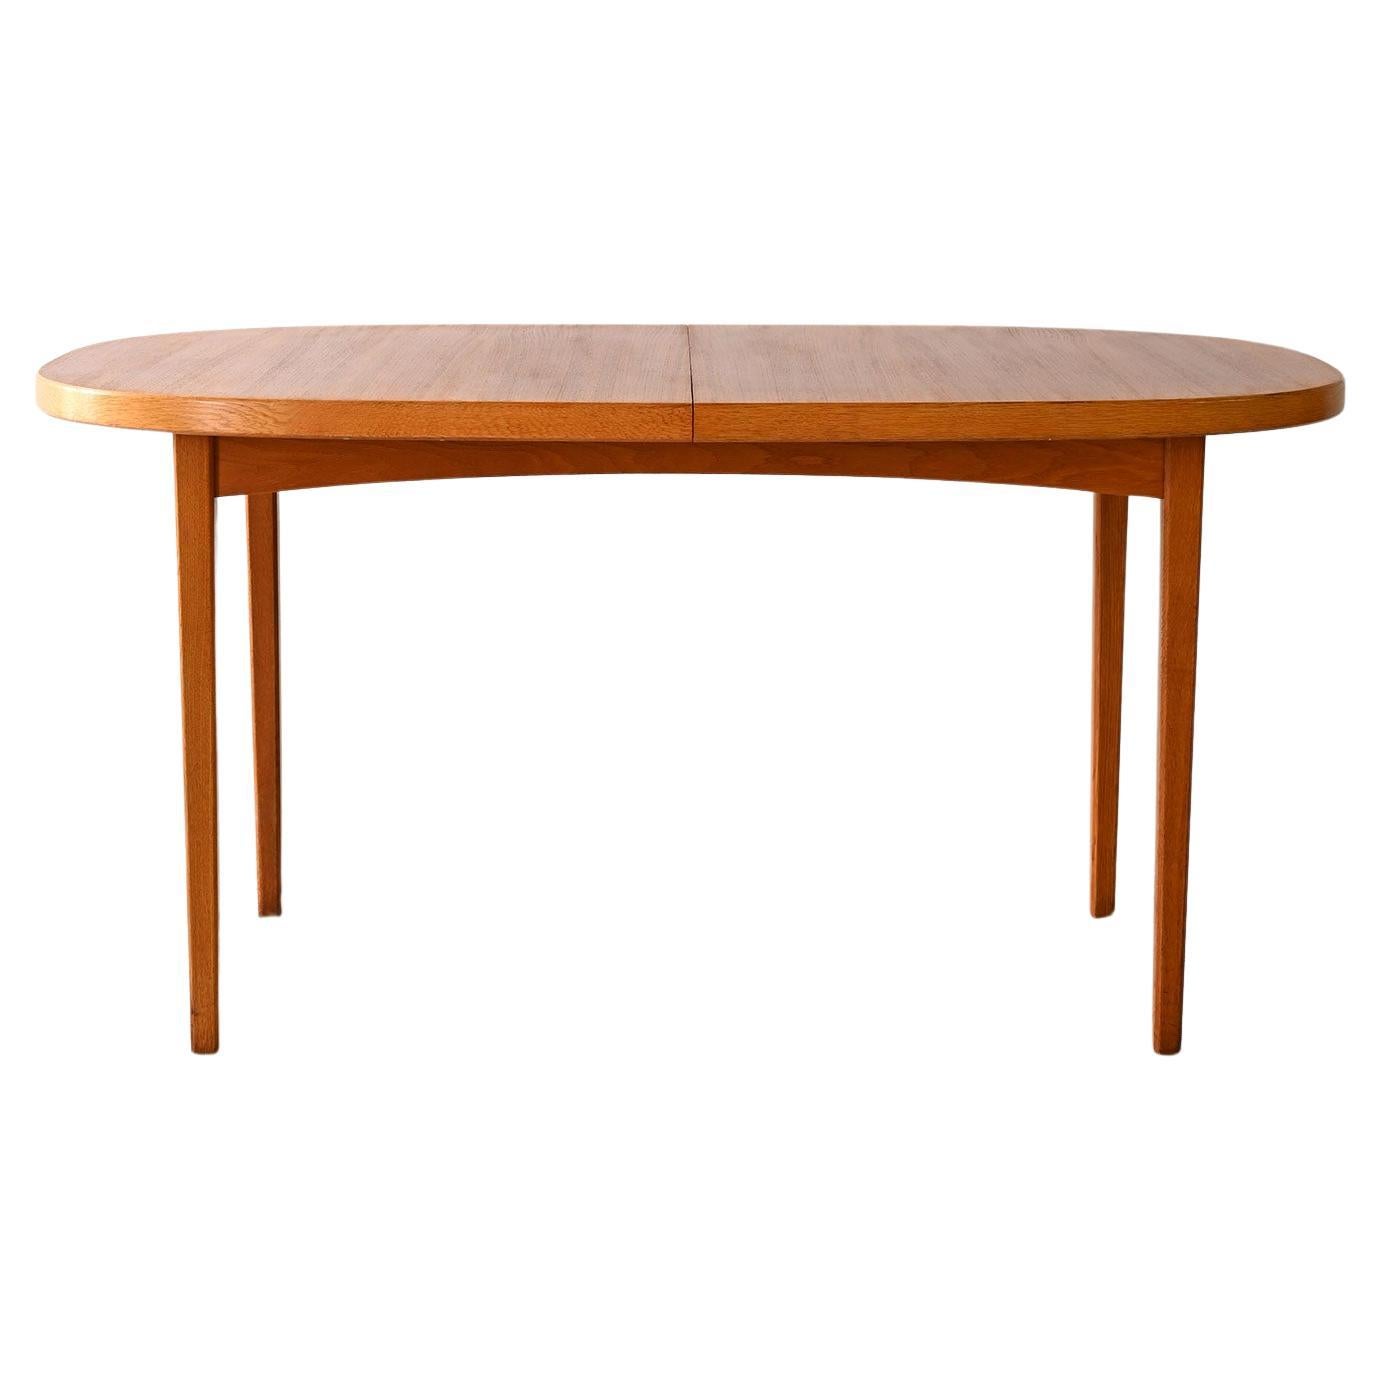 Teak dining table with round corners For Sale